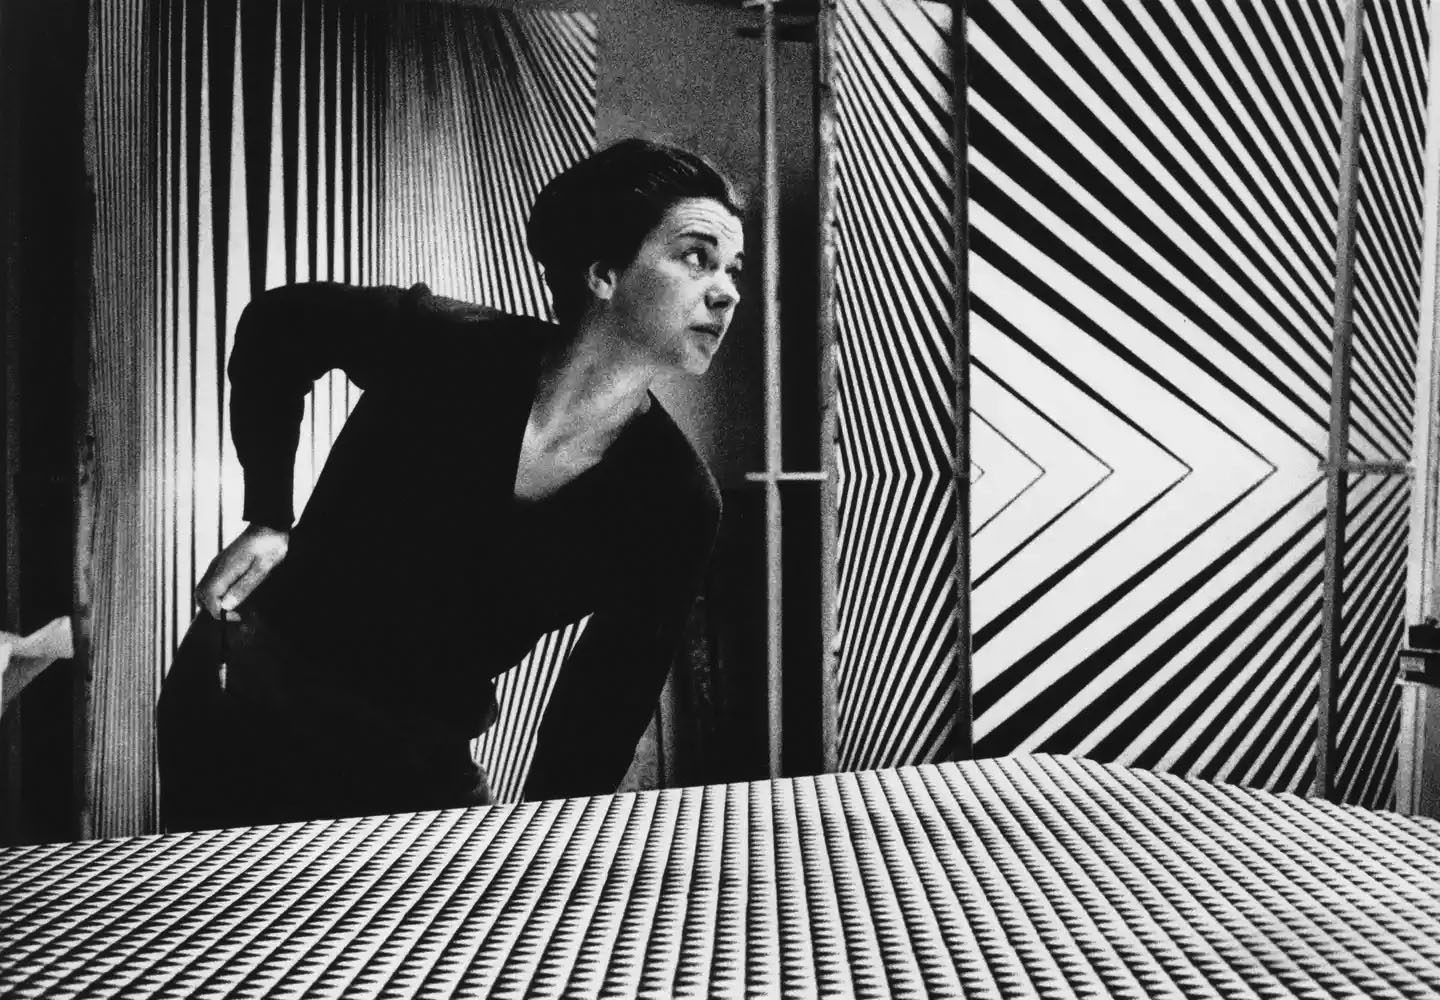 Gallery One: Where and How the World Met the Art of Bridget Riley